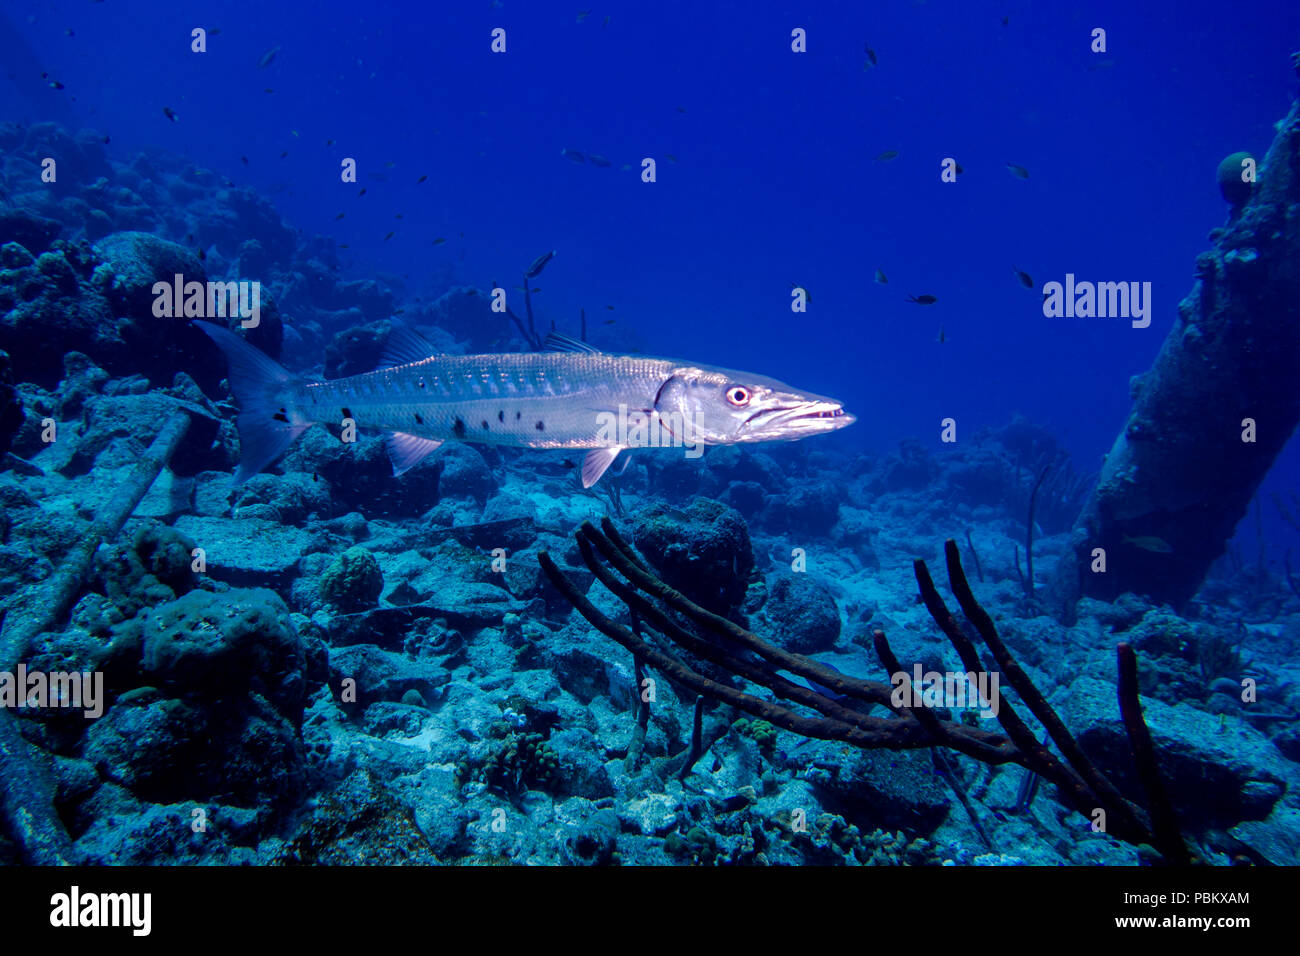 A barracuda swimming on a coral reef Stock Photo